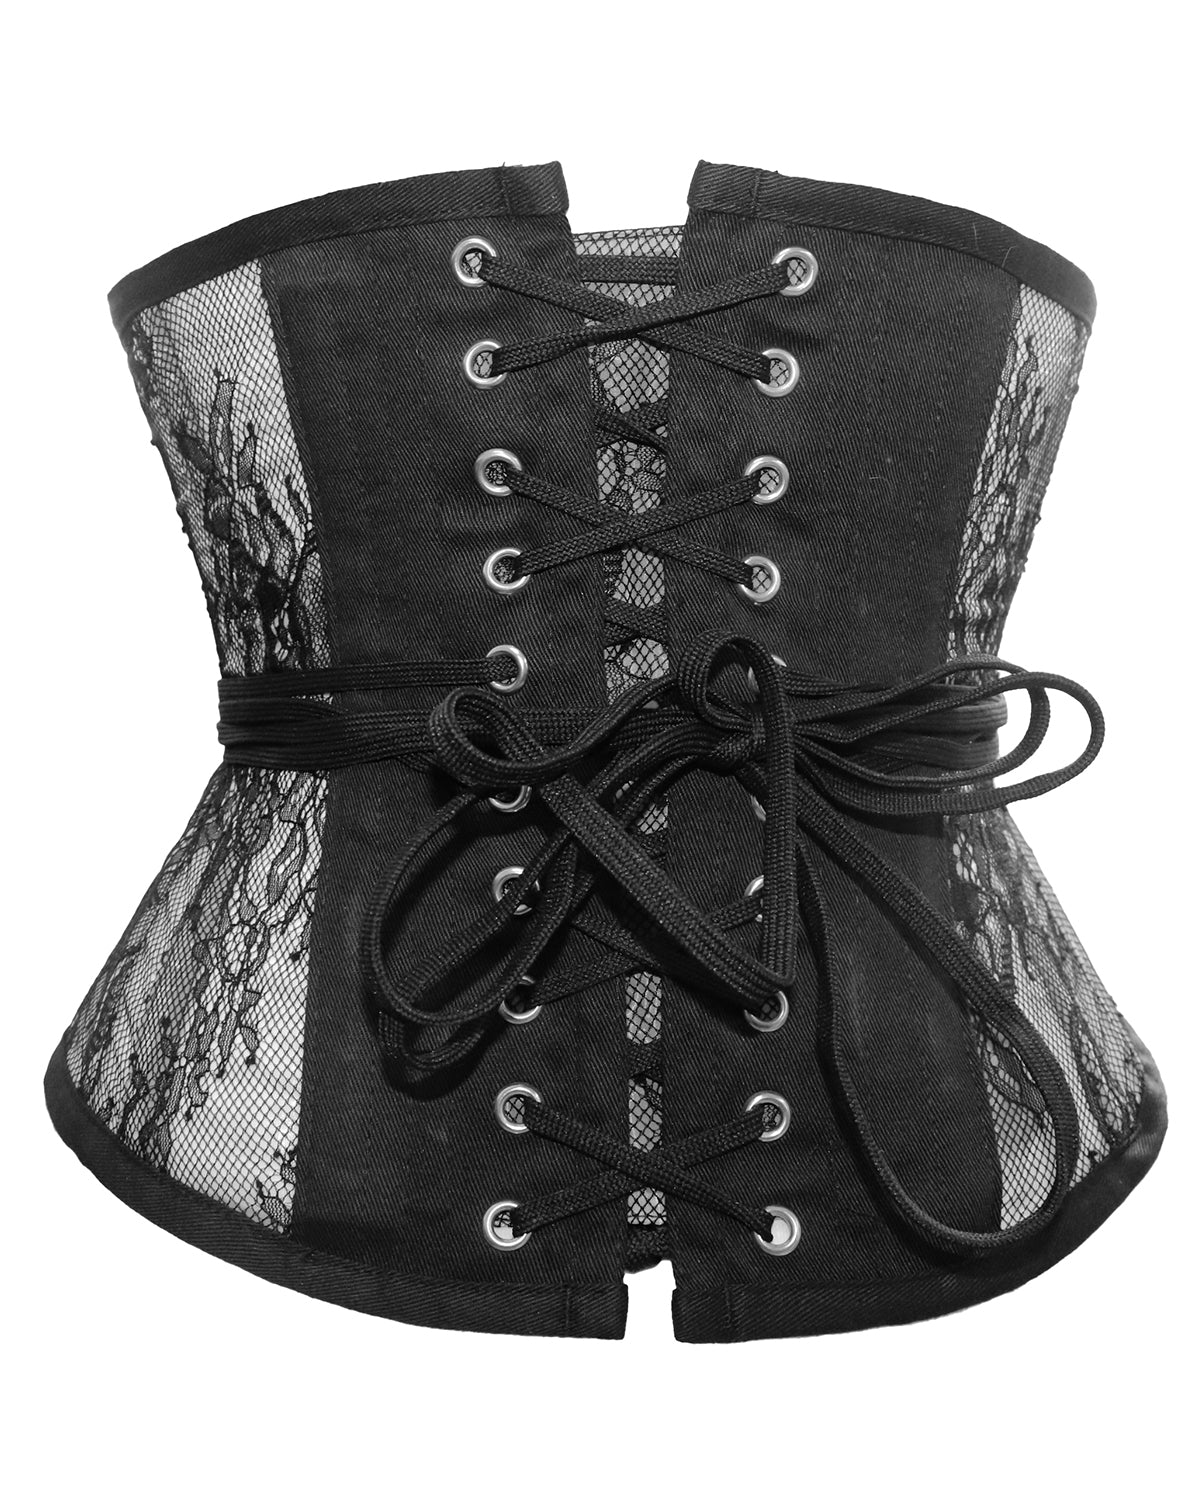 Women's Lace Up Boned Sexy Plus Size Overbust Corset Bustier Top